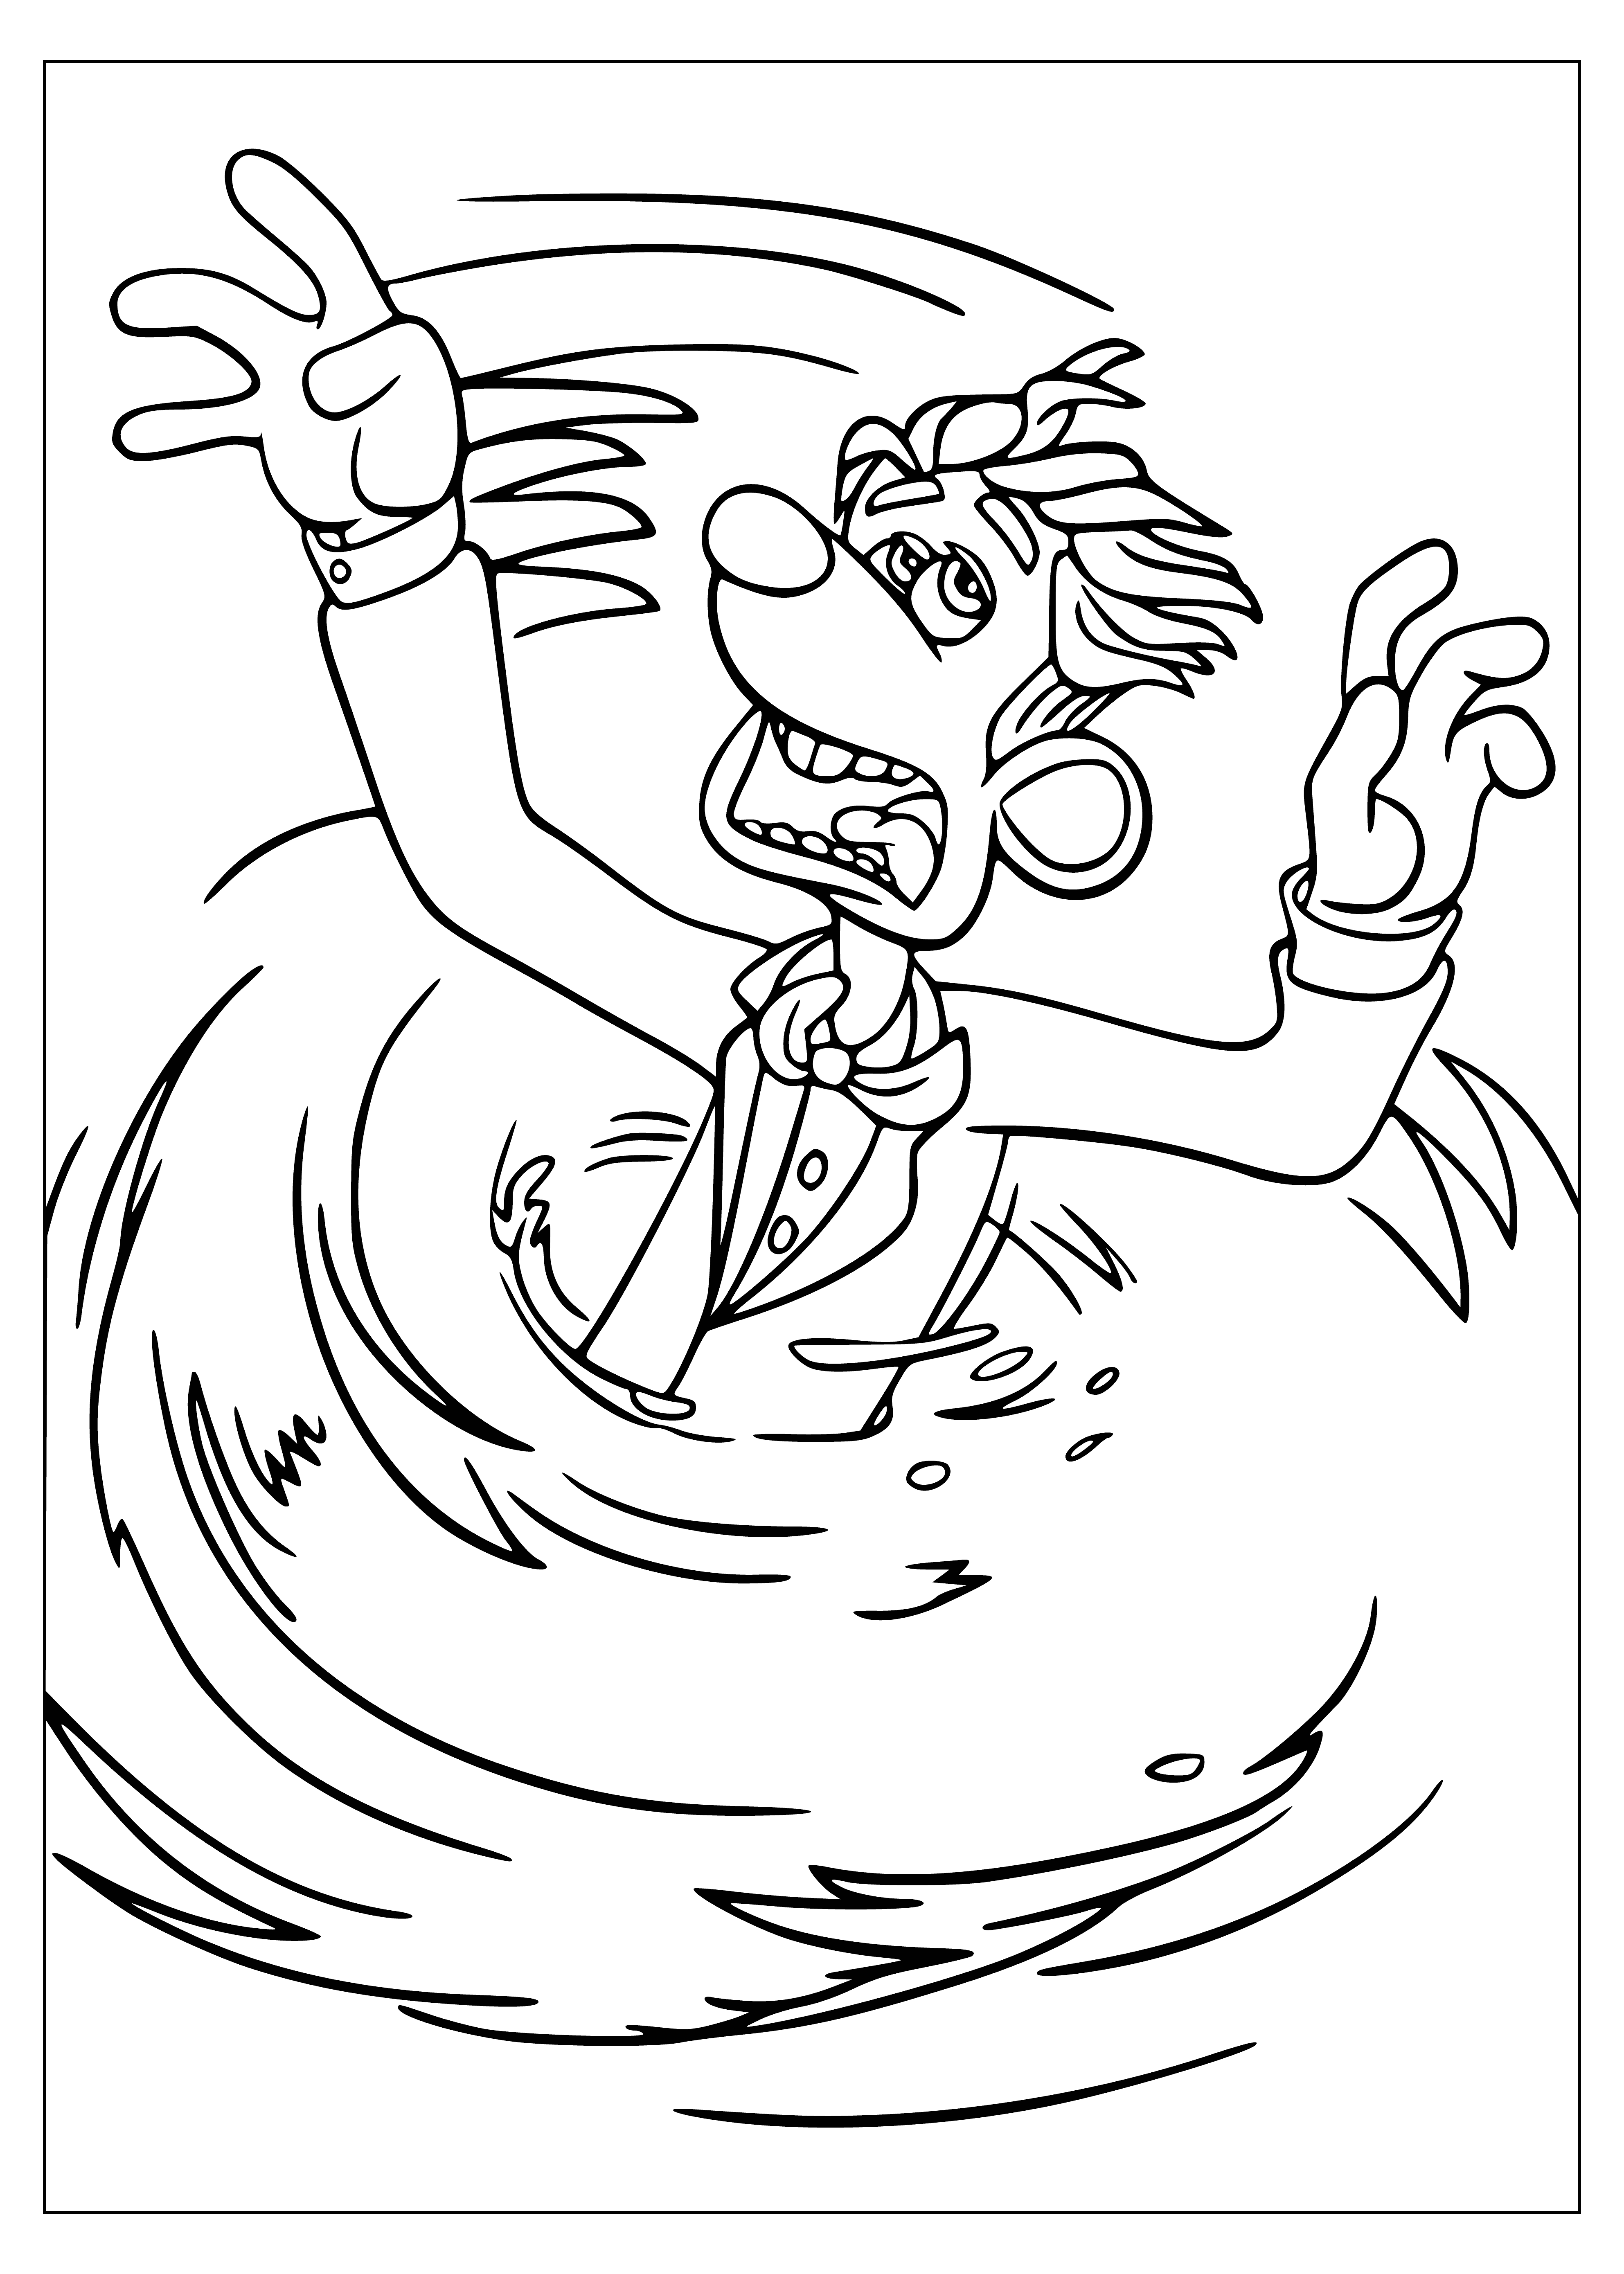 Roddy in the toilet coloring page